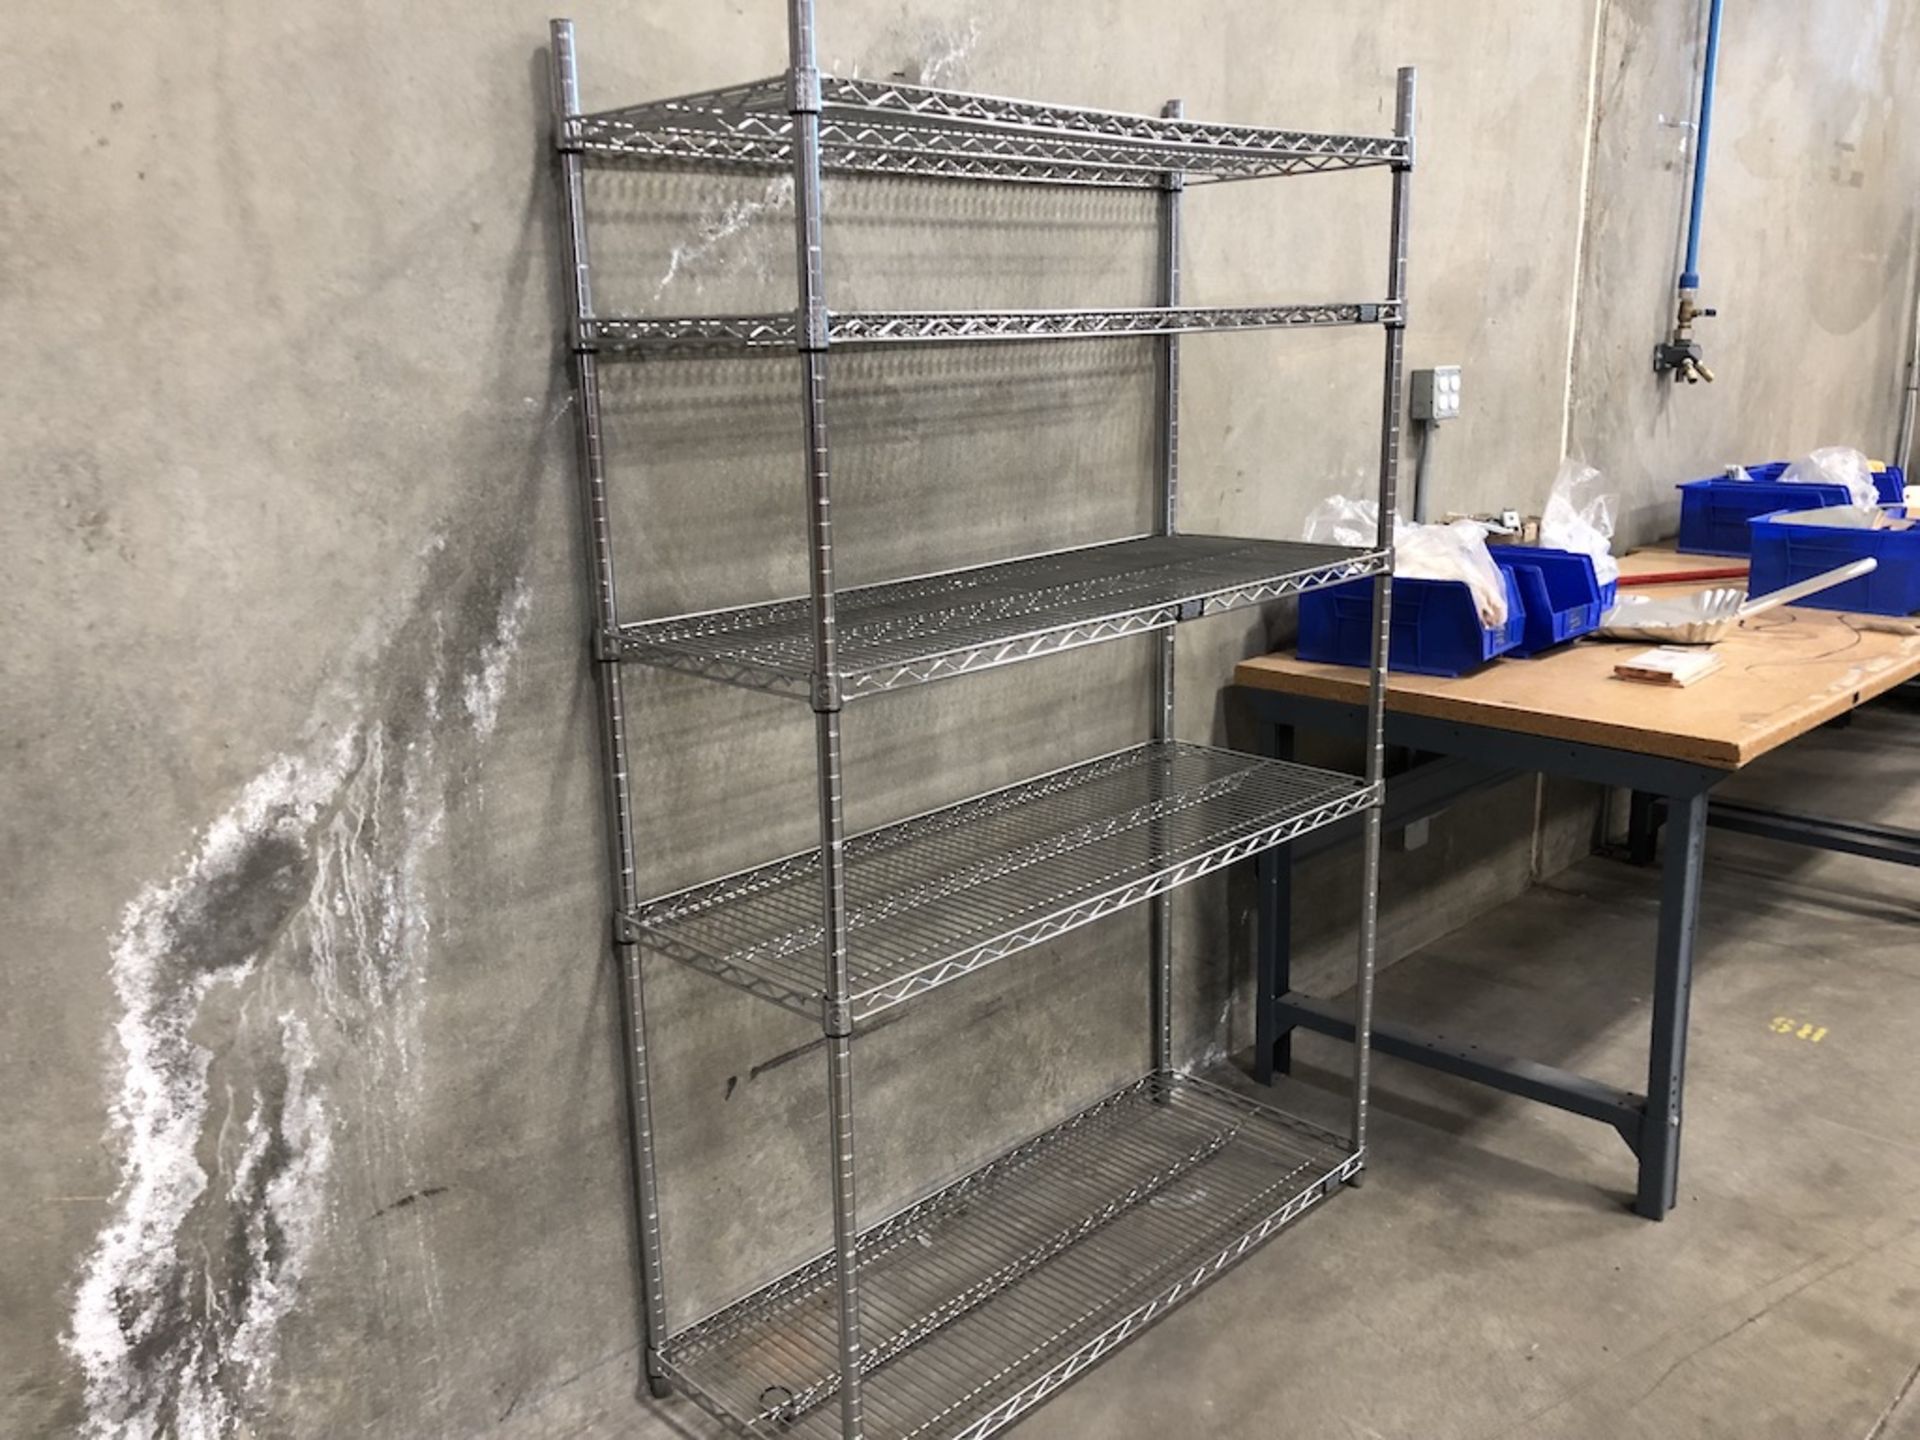 STEEL WIRE RACK 6FT H X 47IN L X 18IN W   SCHNEIDER ELECTRIC- 6611 PRESTON AVE SUITE A - Image 2 of 3